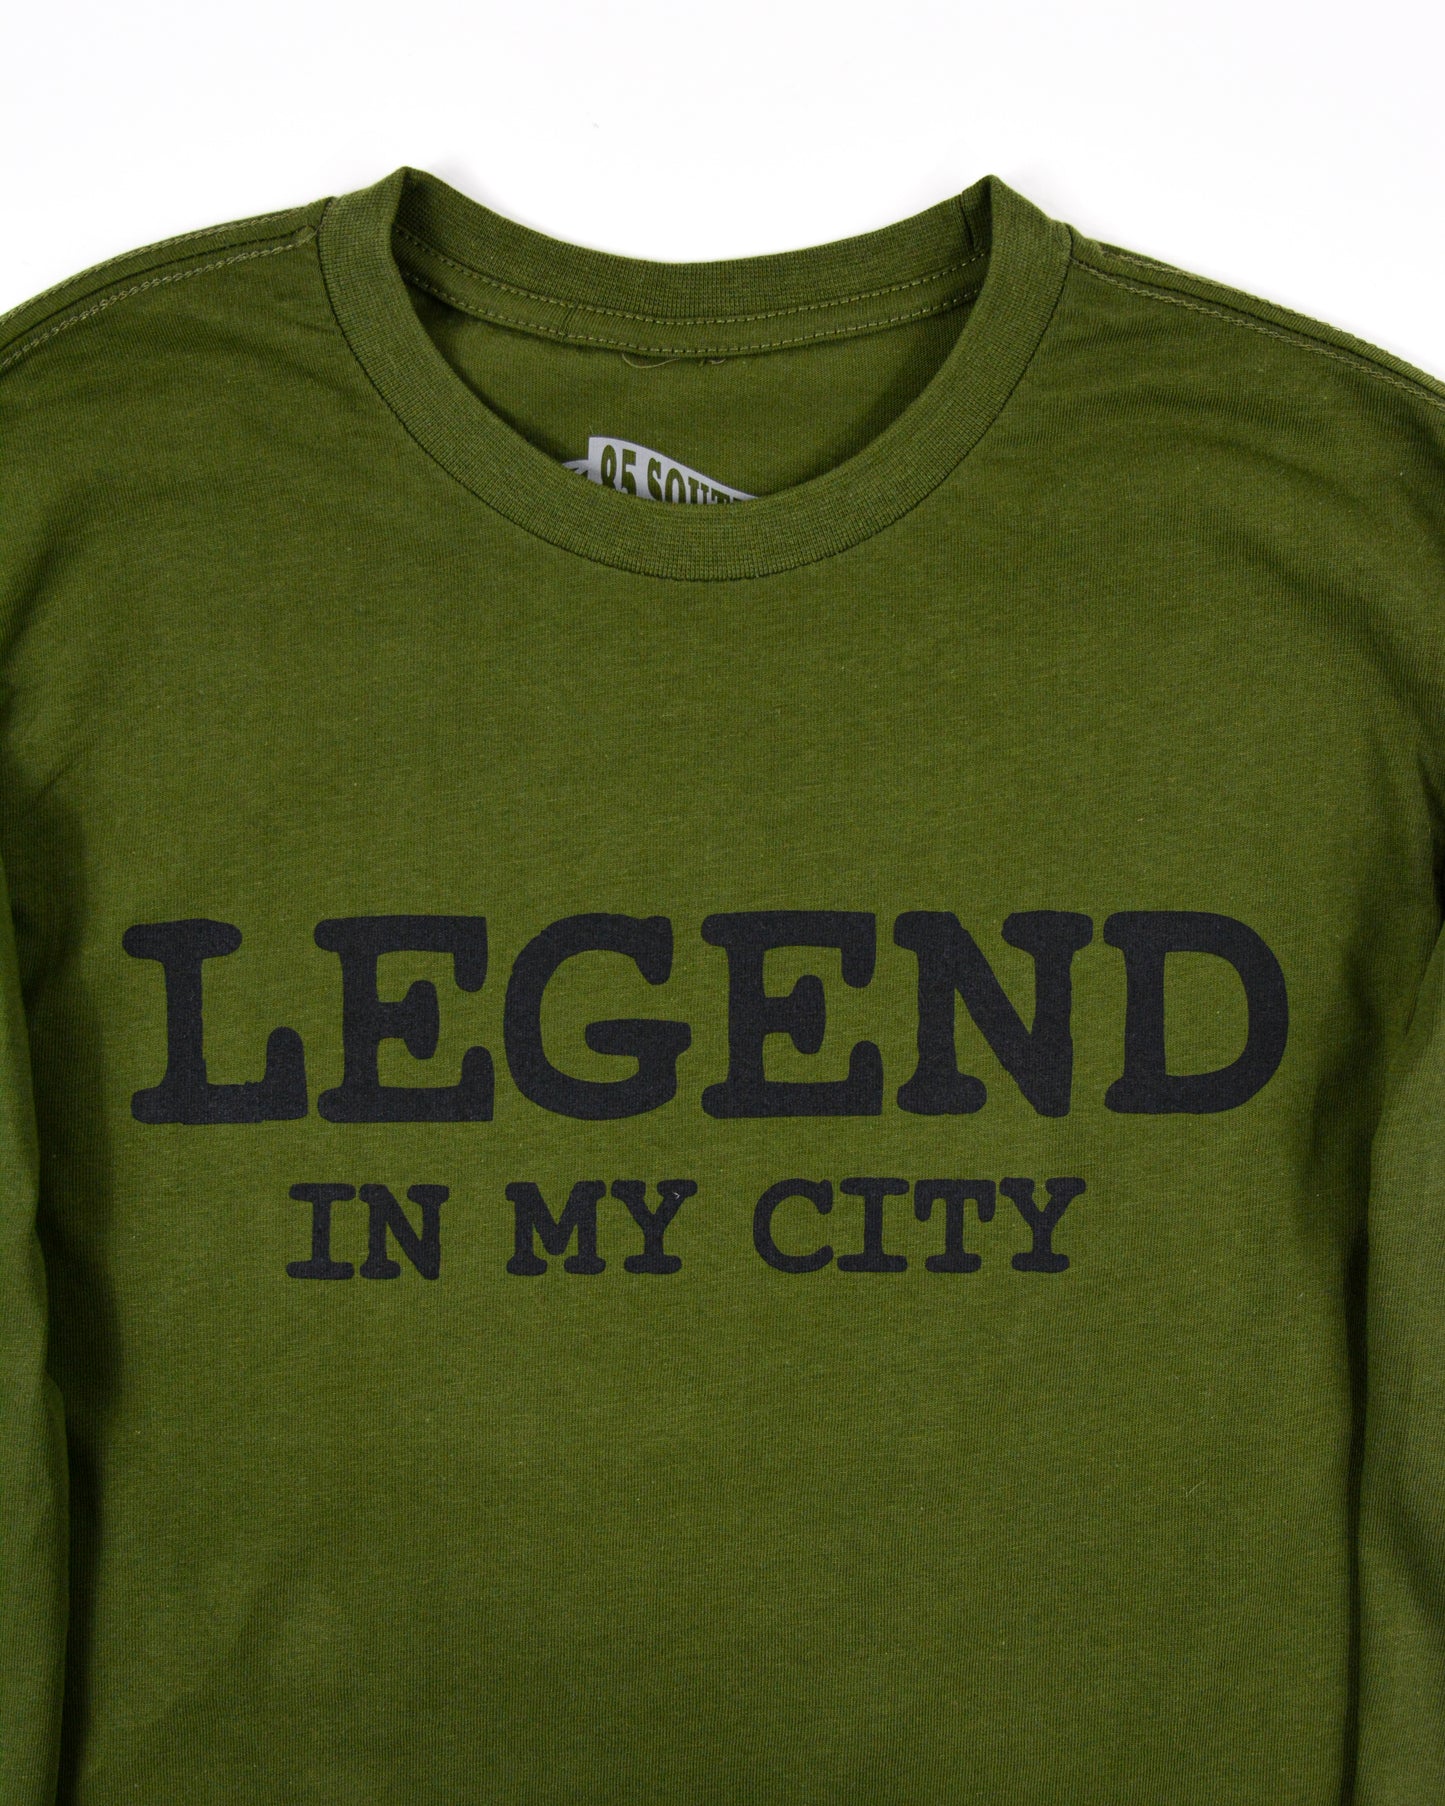 Legend In My City LS - Olive